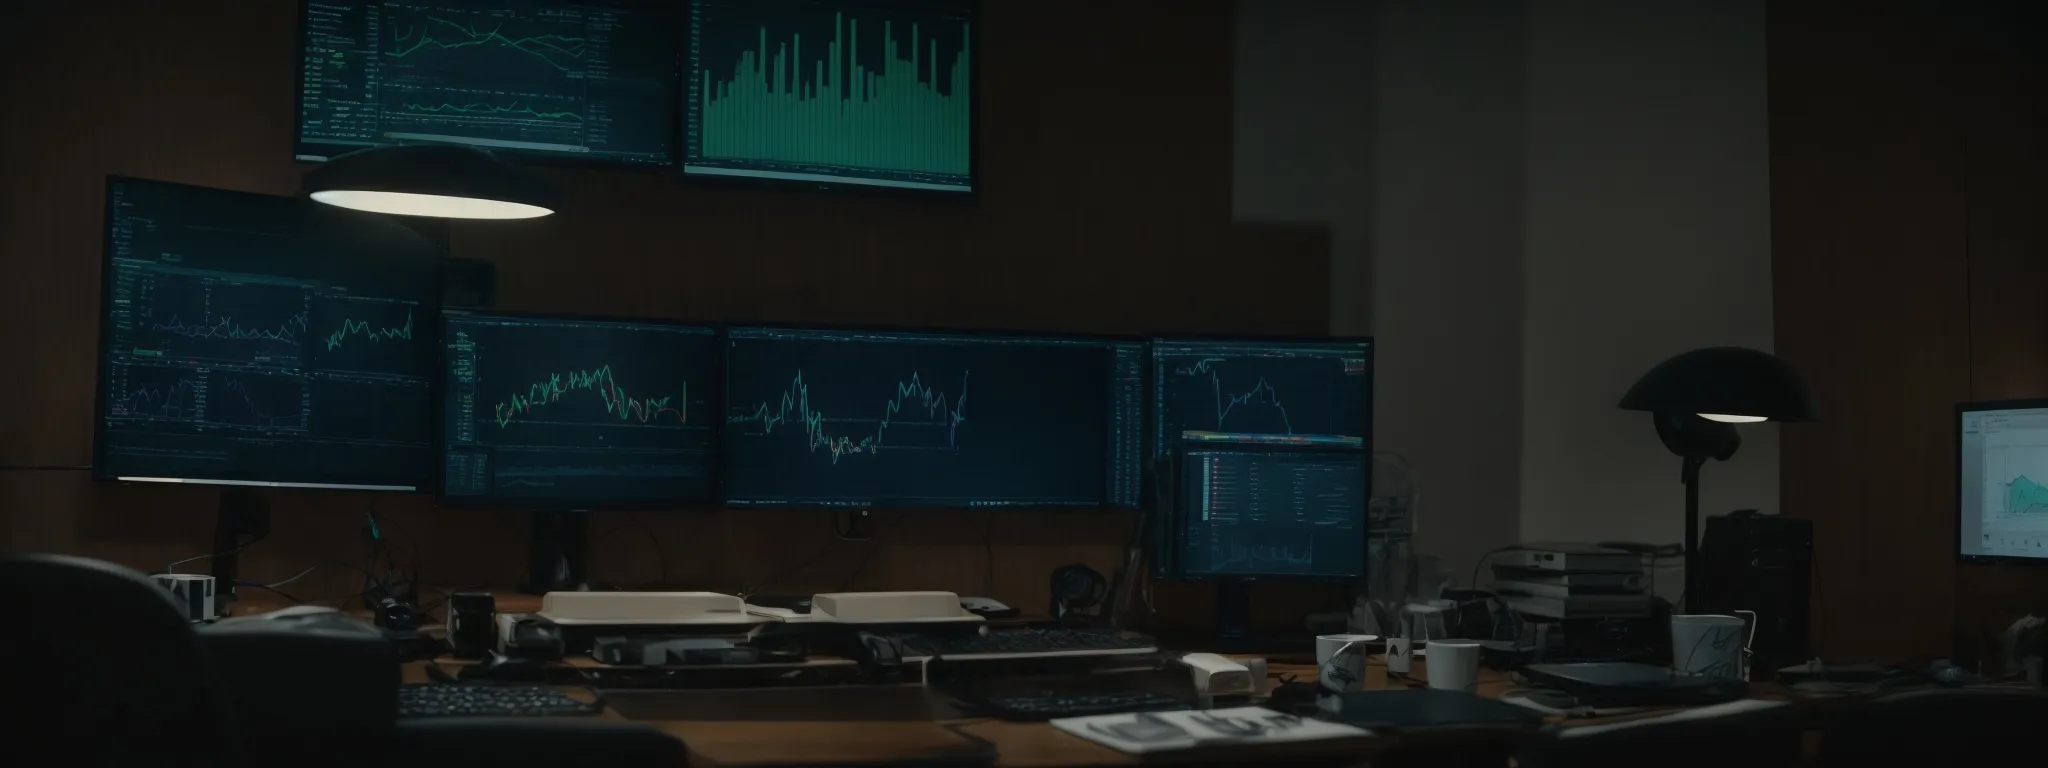 a person sits at a desk with two computer monitors displaying graphs and analytics information.